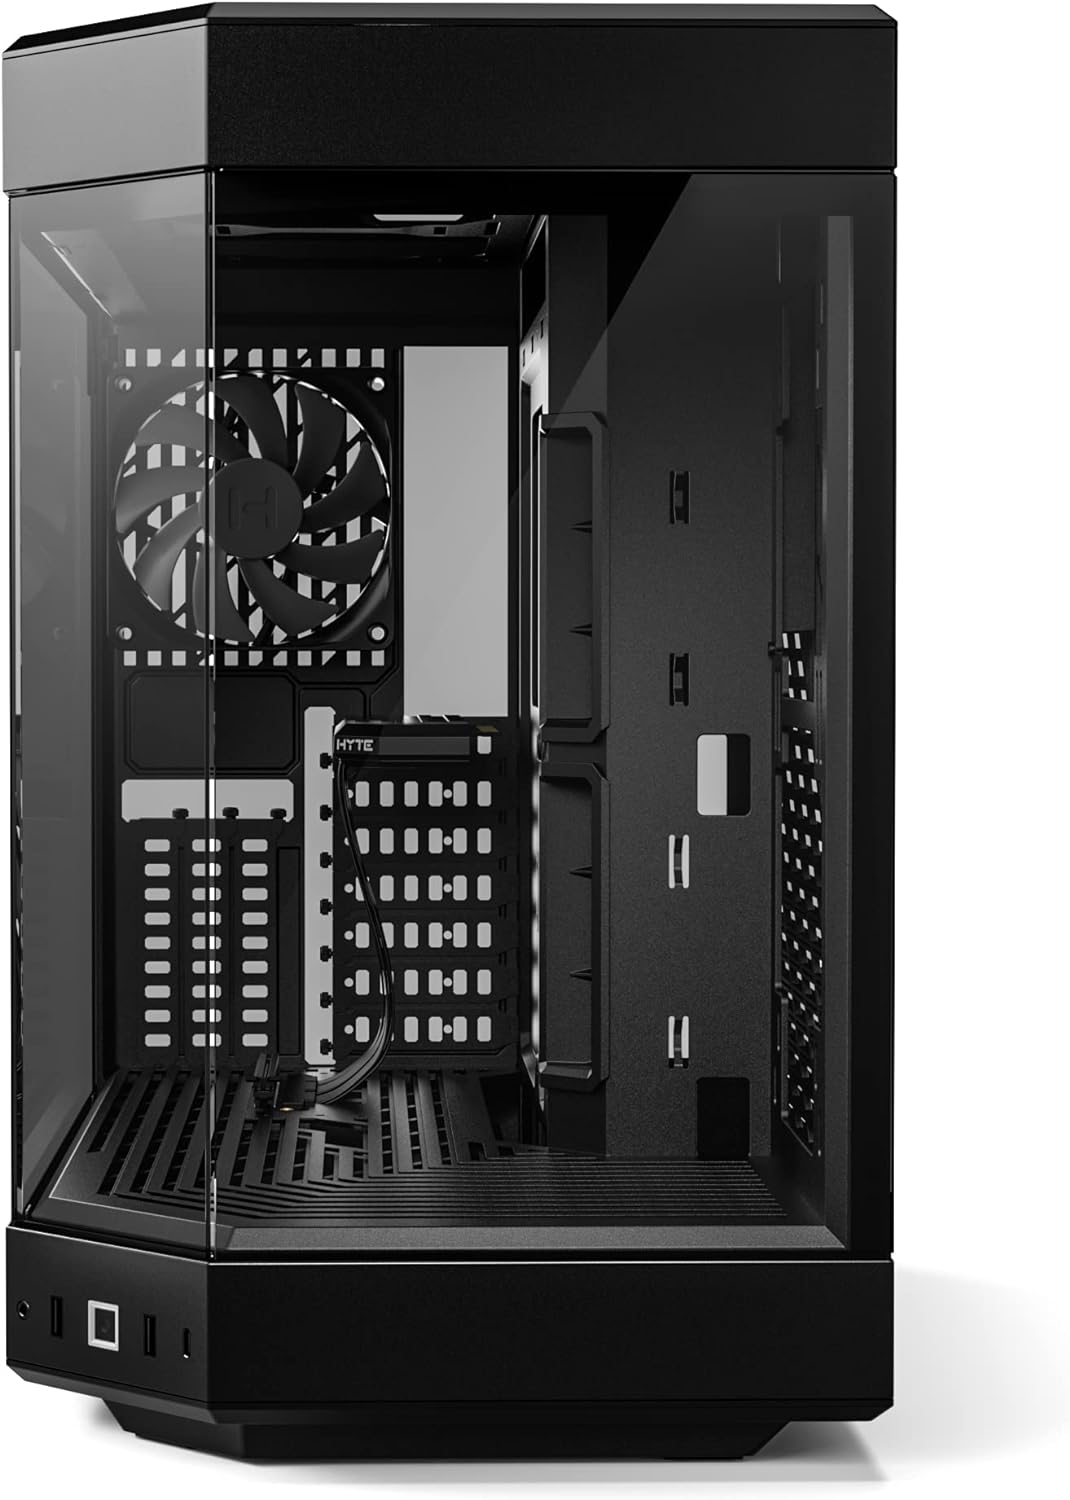 SKU: 0848604042855, Barcode: 848604042855 - HYTE Y60 Modern Aesthetic Mid-Tower ATX Gaming Case - Tempered Glass, PCIE 4.0 Riser Cable - Black: Vertical GPU mounting for a unique visual experience.